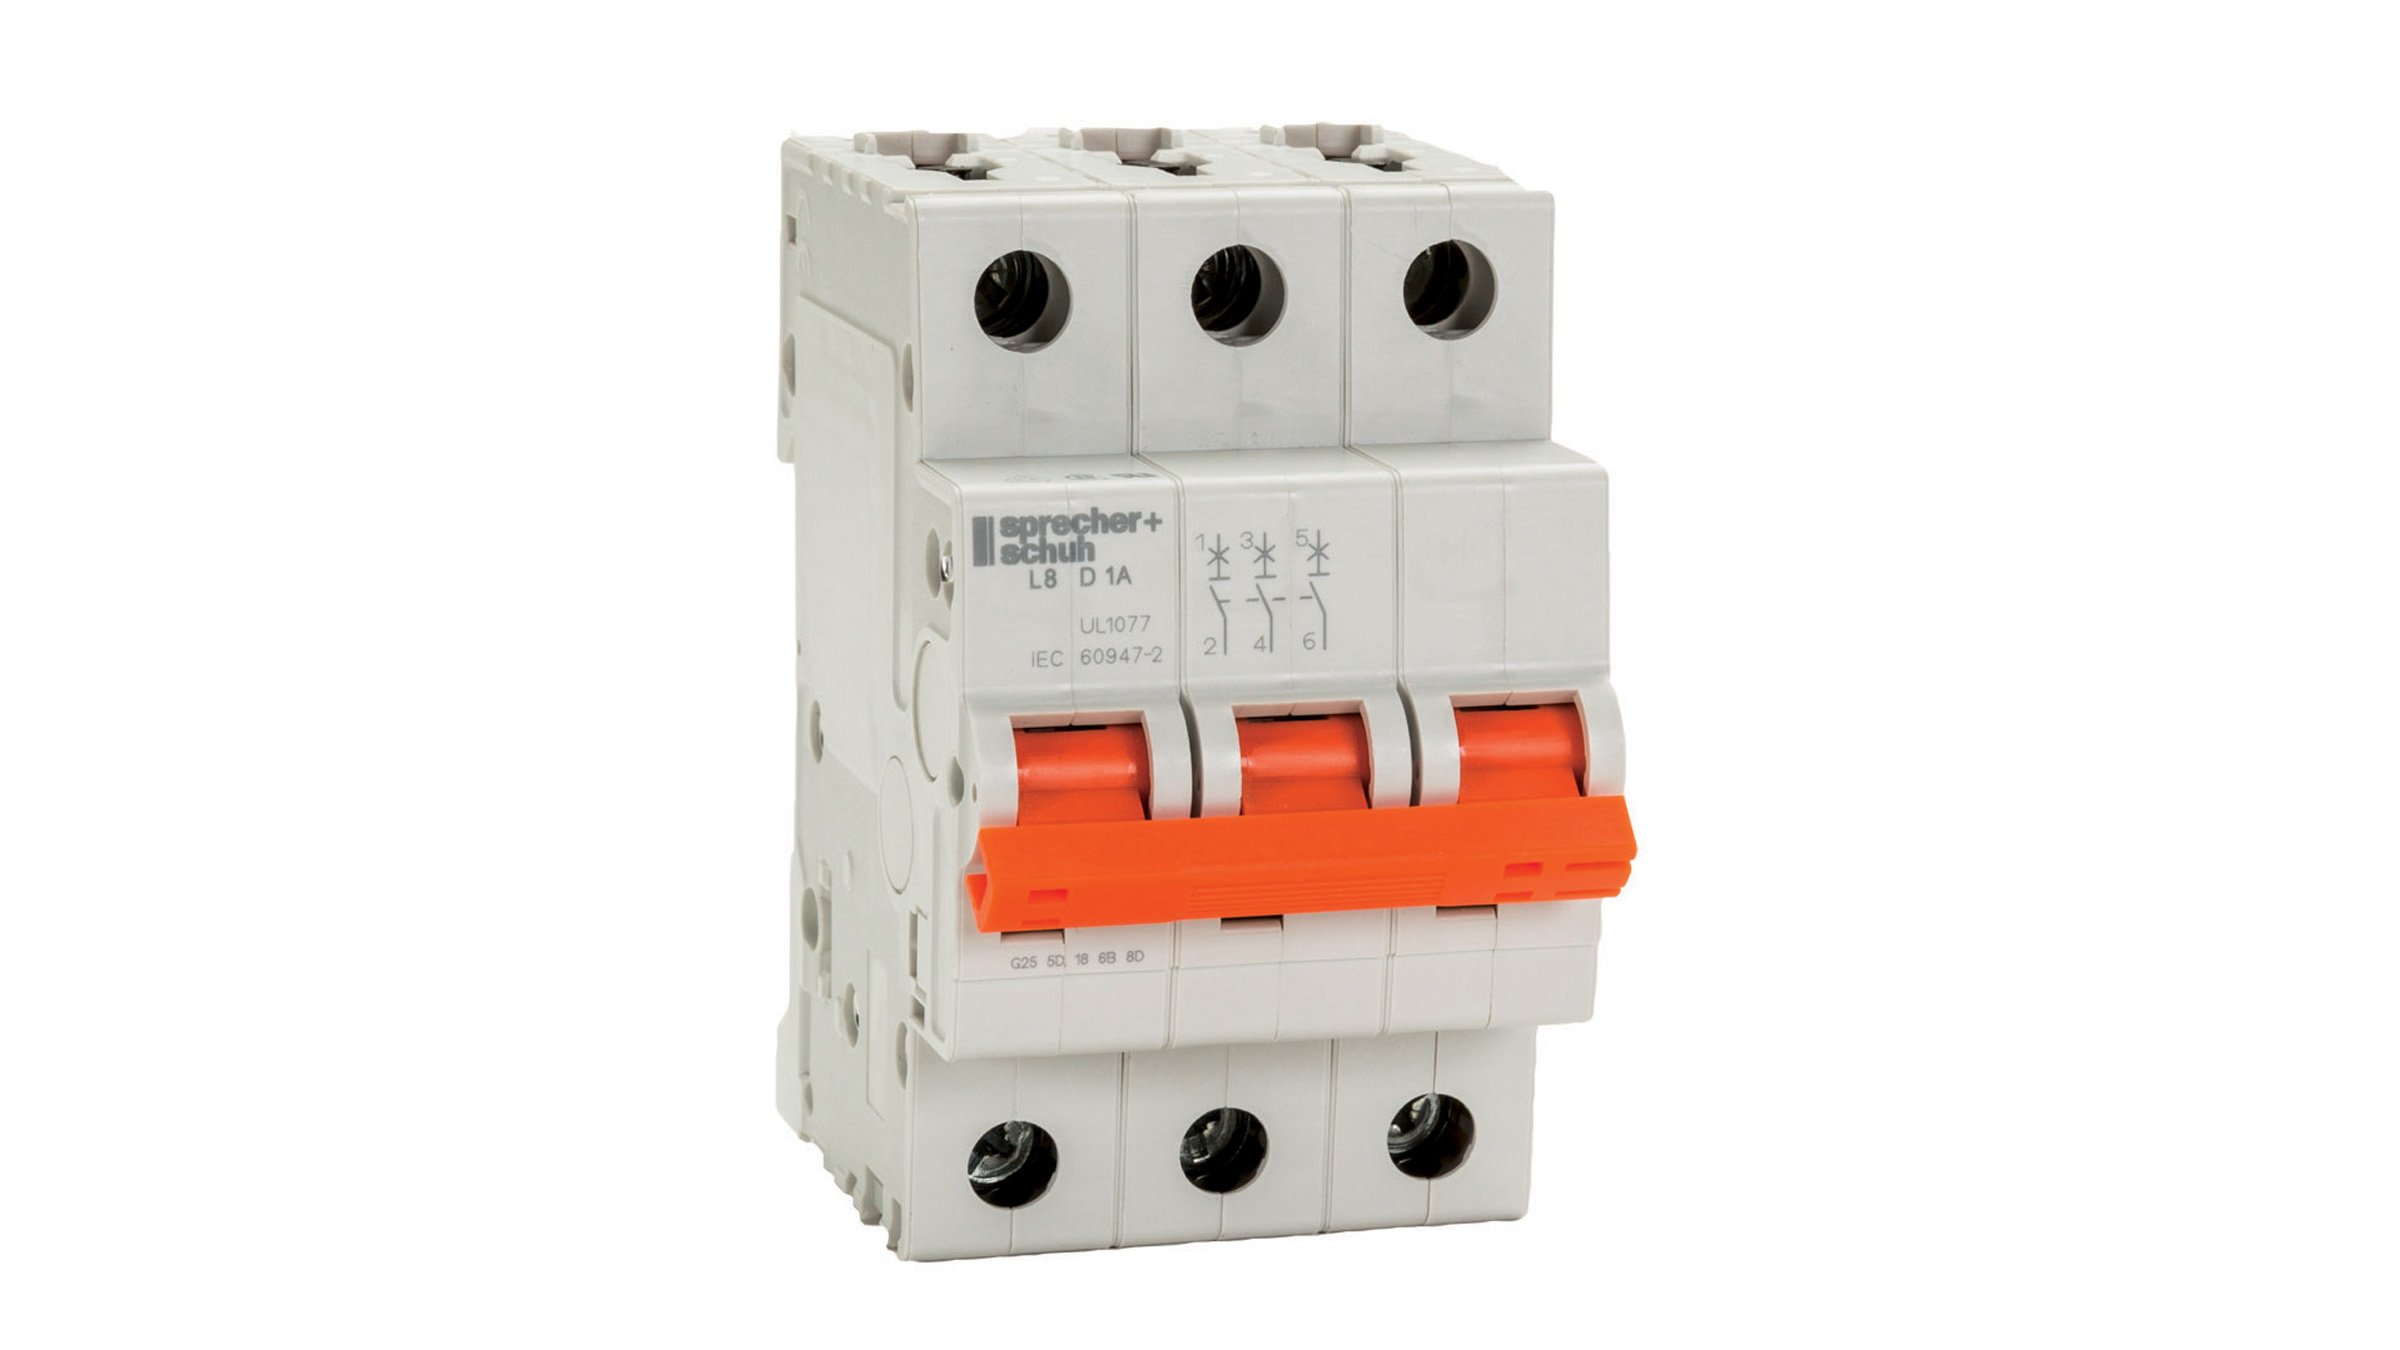 UL1077 supplemental short circuit protection for industrial applications up to 63 amps.